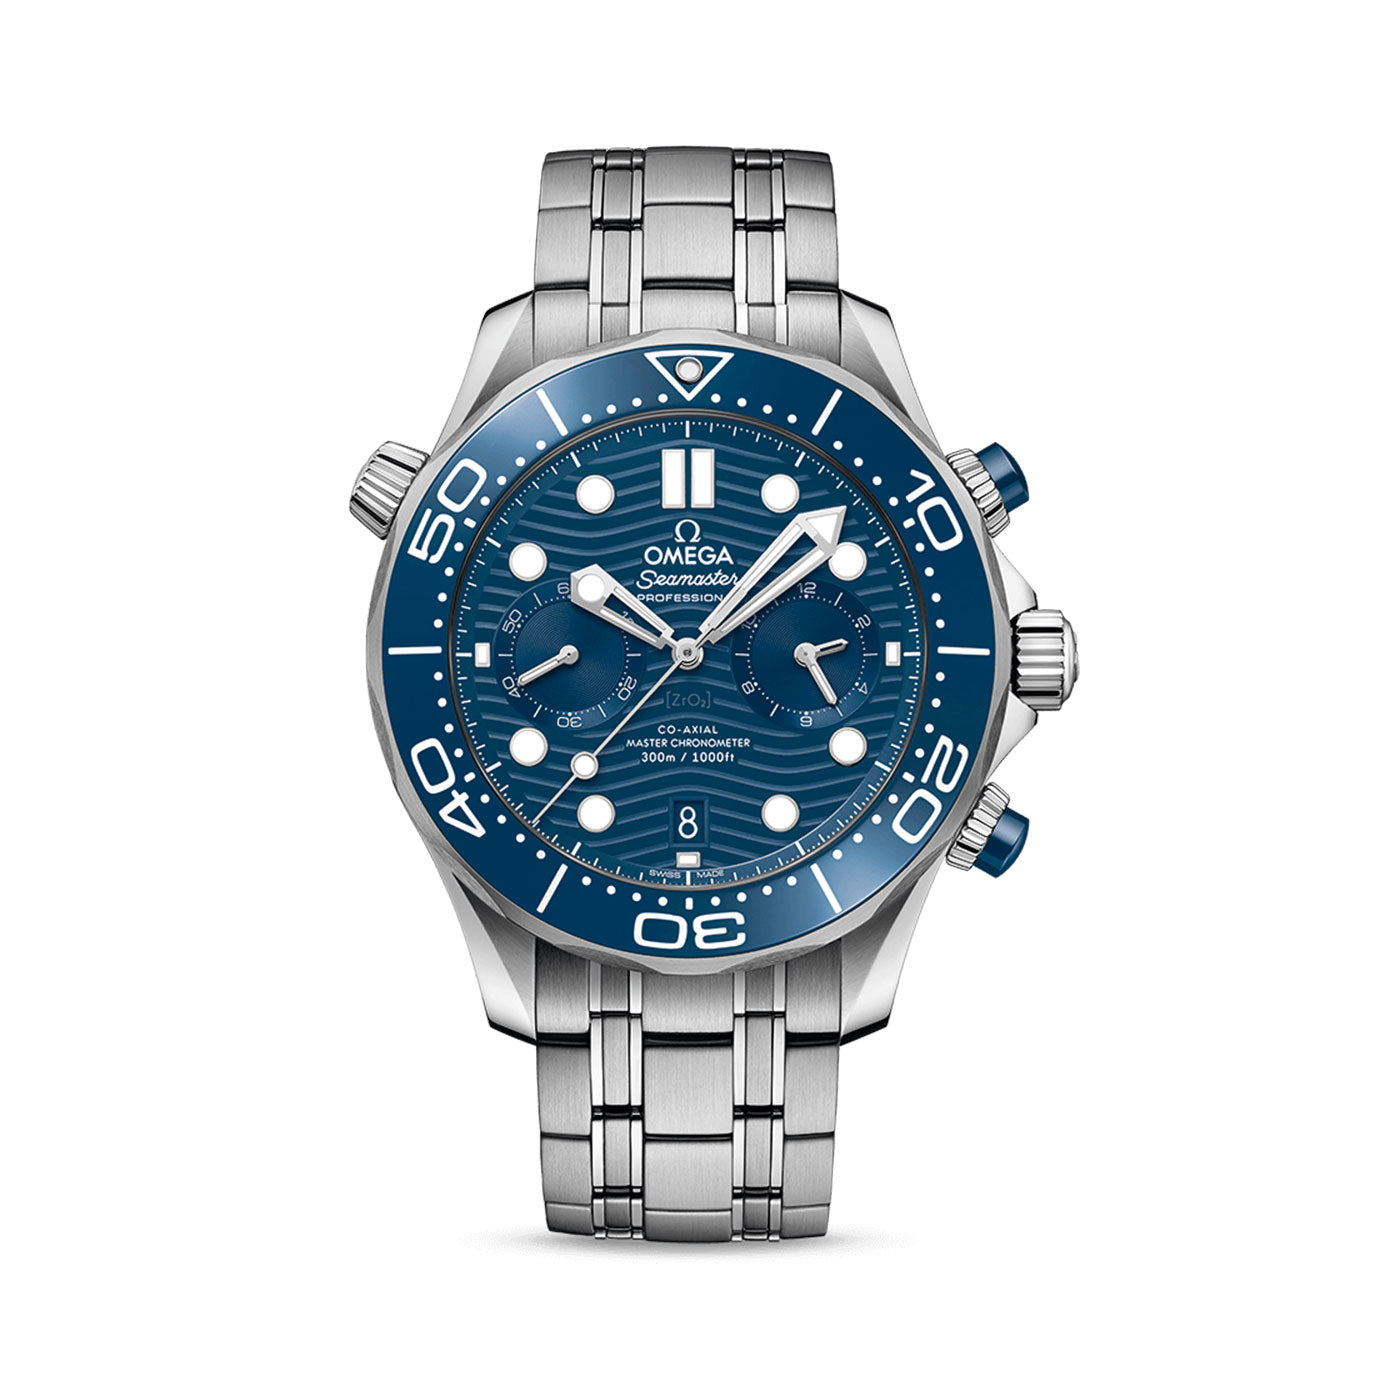 Omega Seamaster Diver 300M Steel Anti-magnetic Watch - 210.30.44.51.03.002